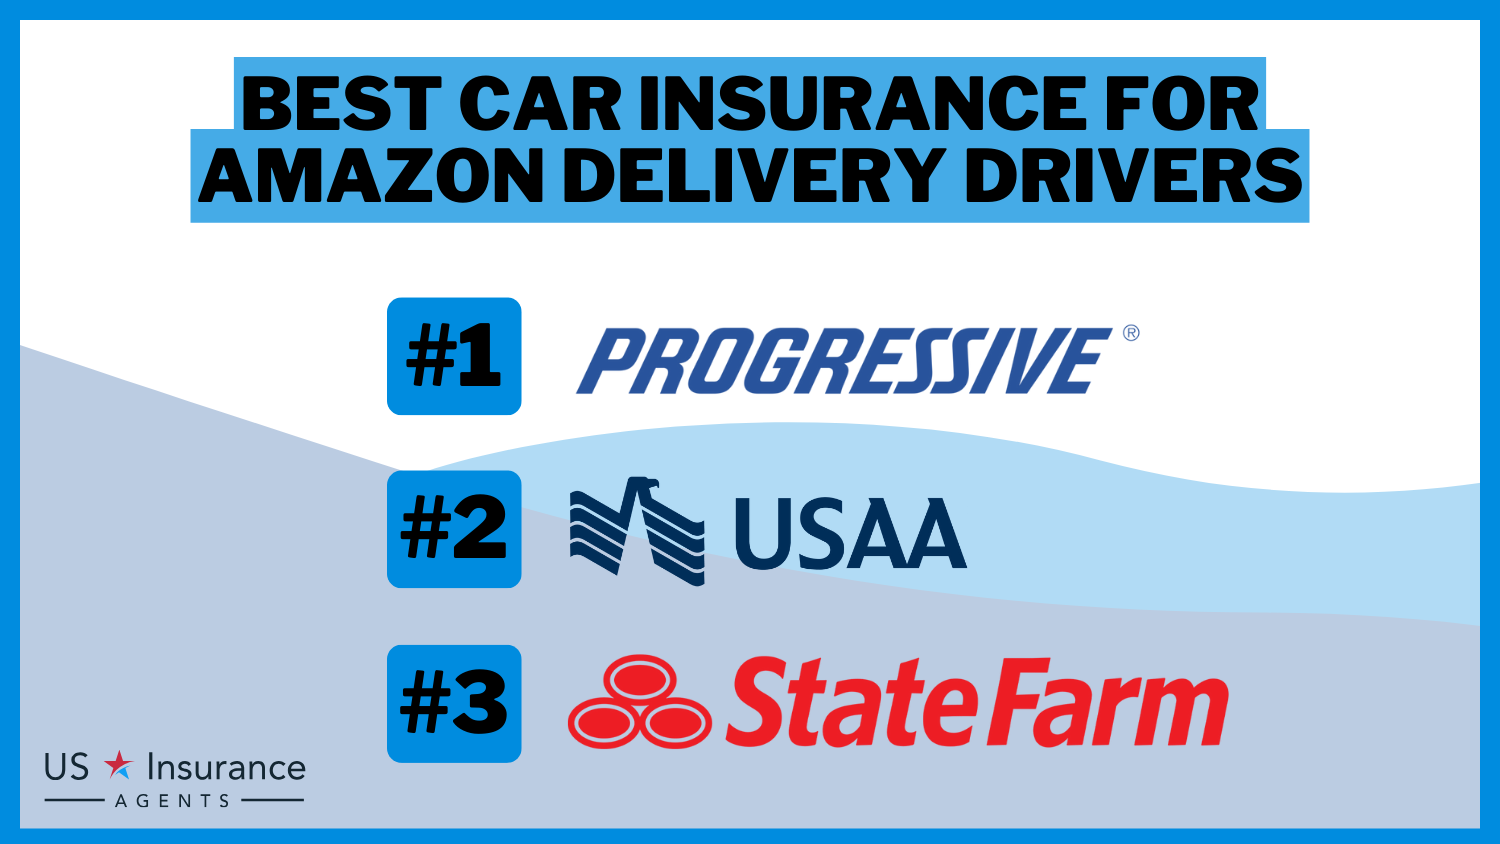 3 Best Car Insurance for Amazon Delivery Drivers: Progressive, USAA, and State Farm.